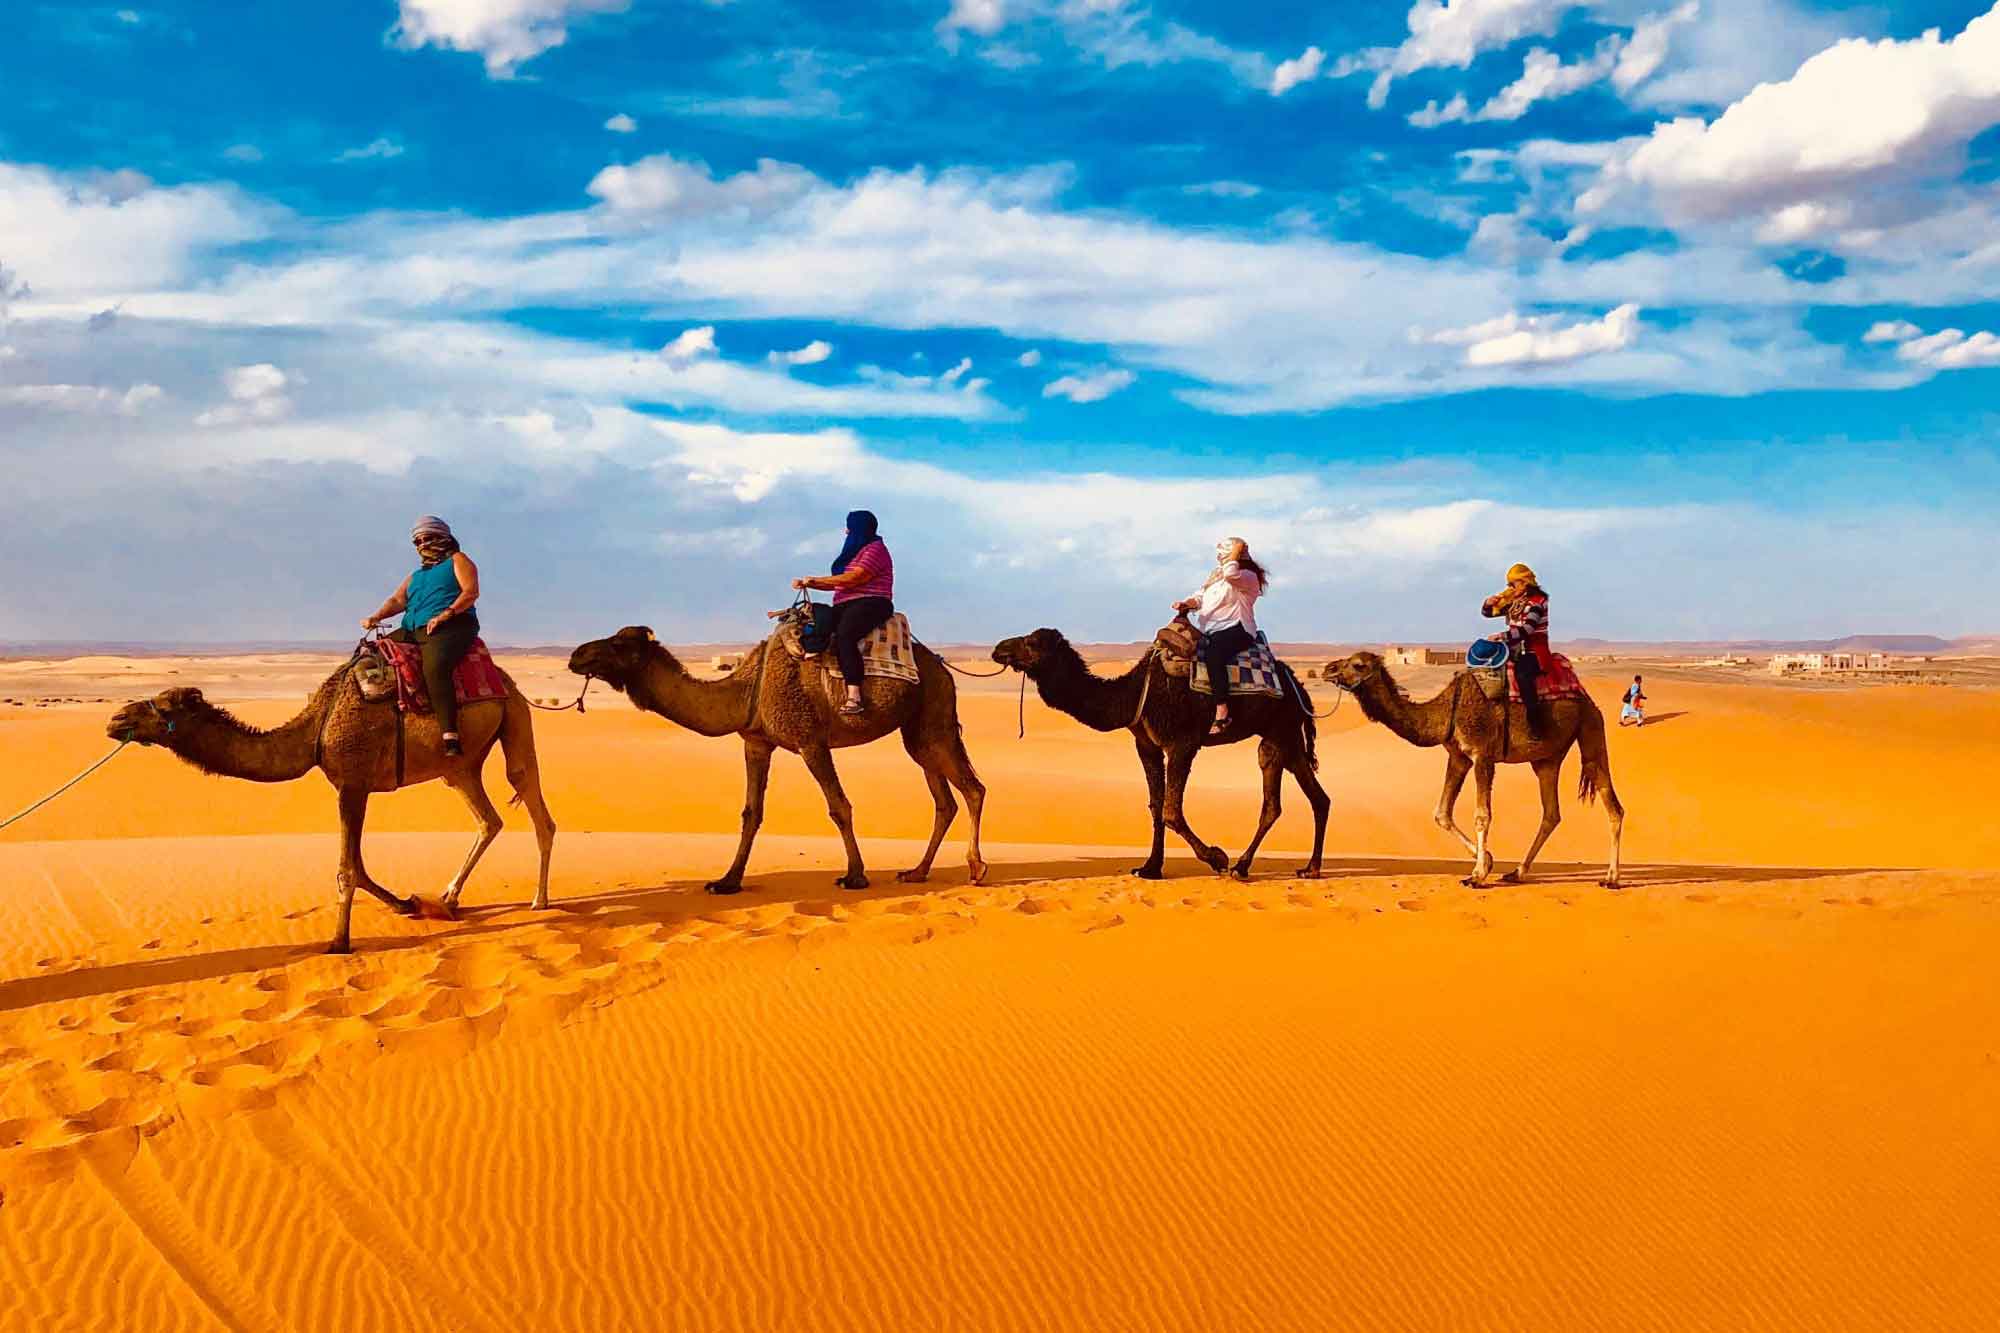 12 days Morocco discovery tour from Fez to discover Imperial cities and Desert of Morocco